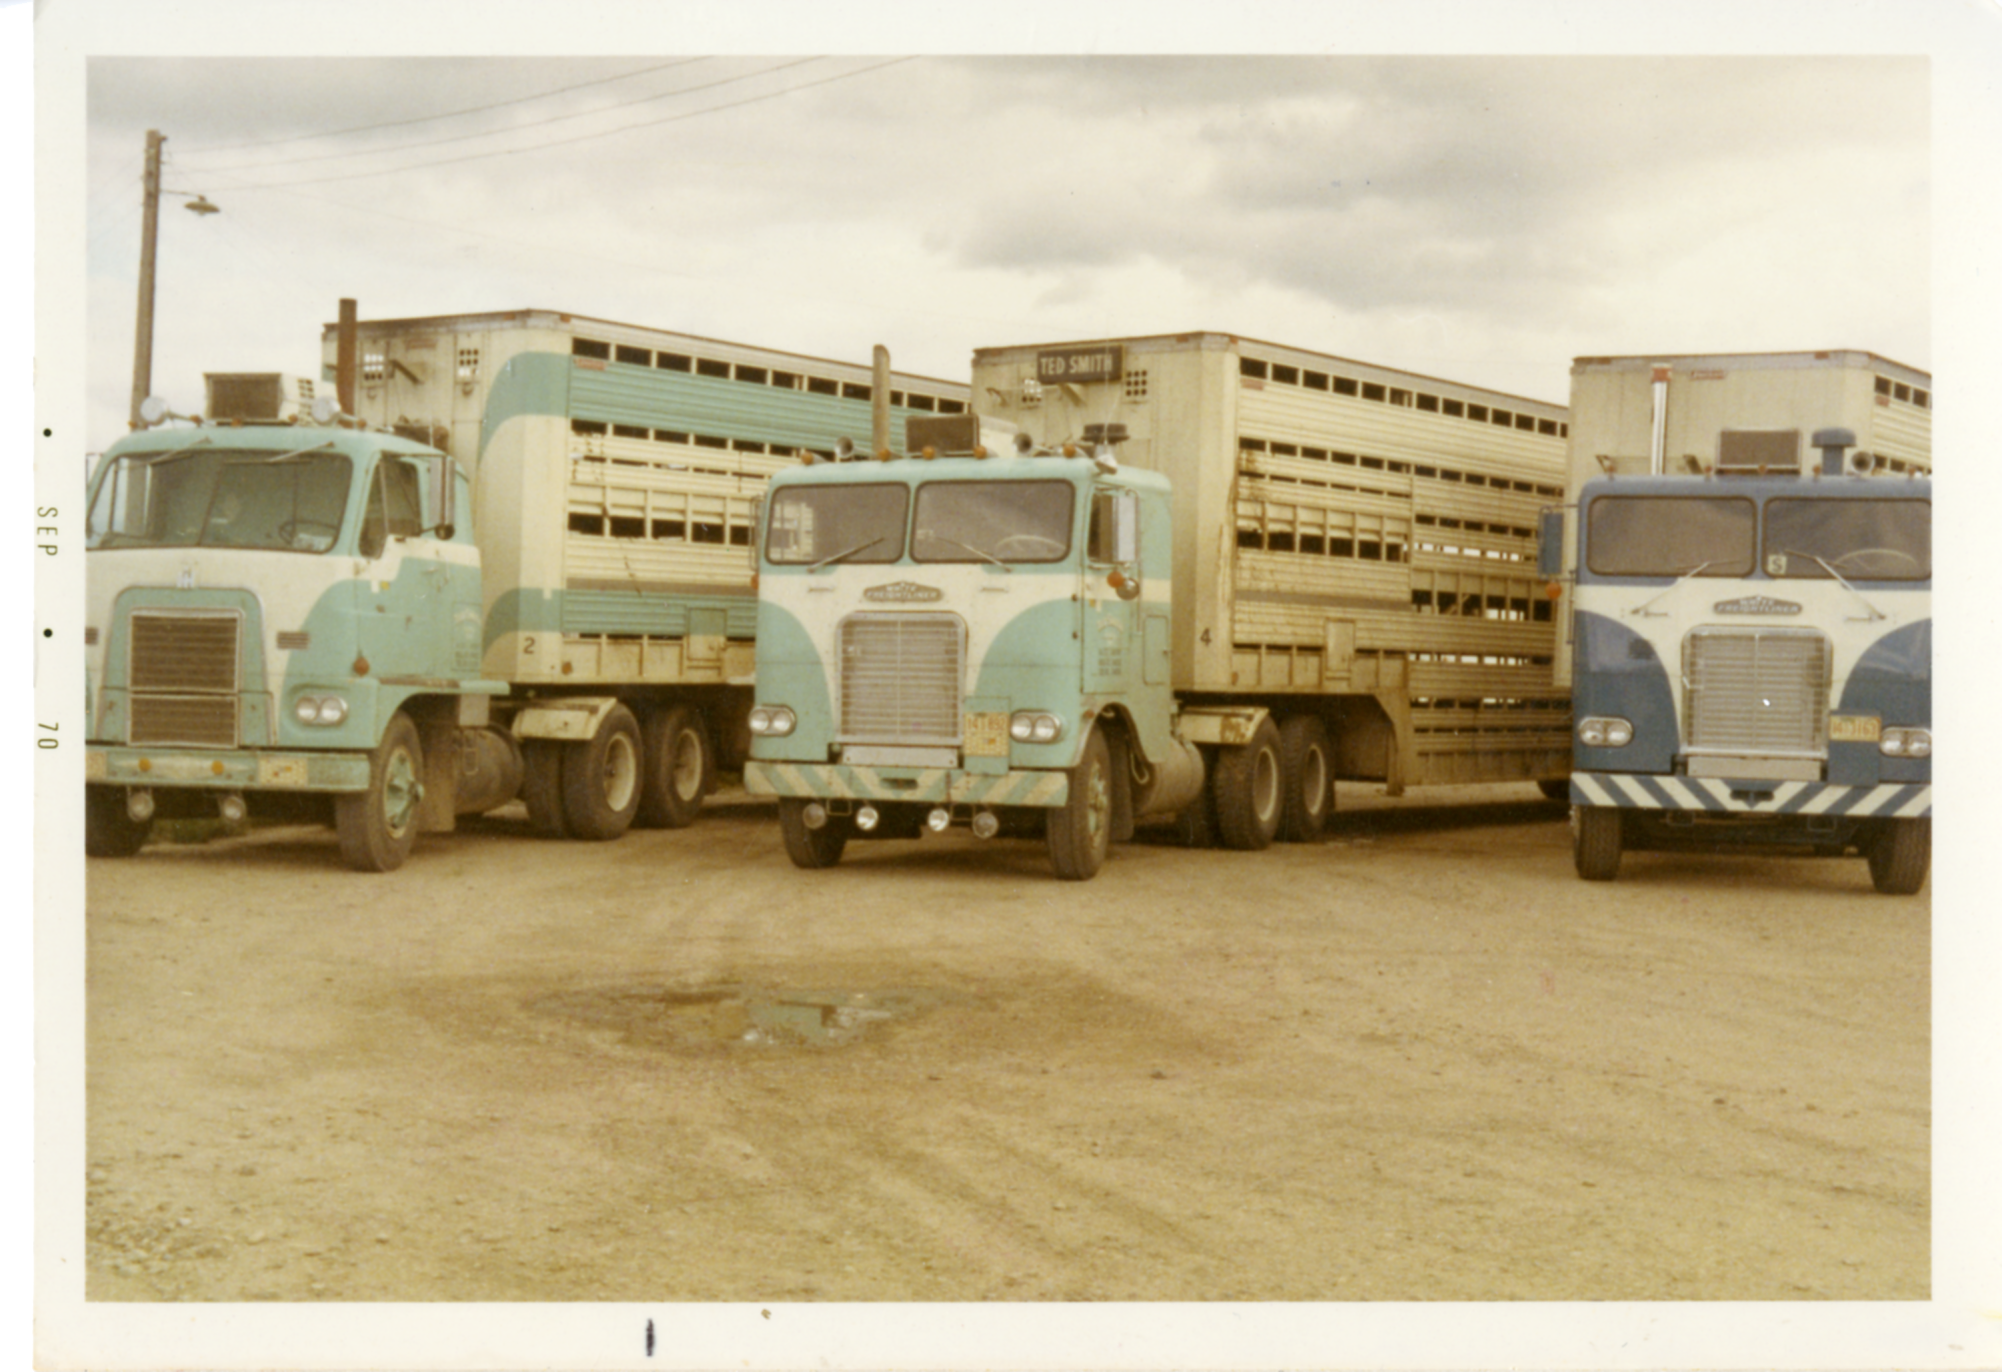 Livestock trucks for Smith's Disposal and Trucking, 1970.